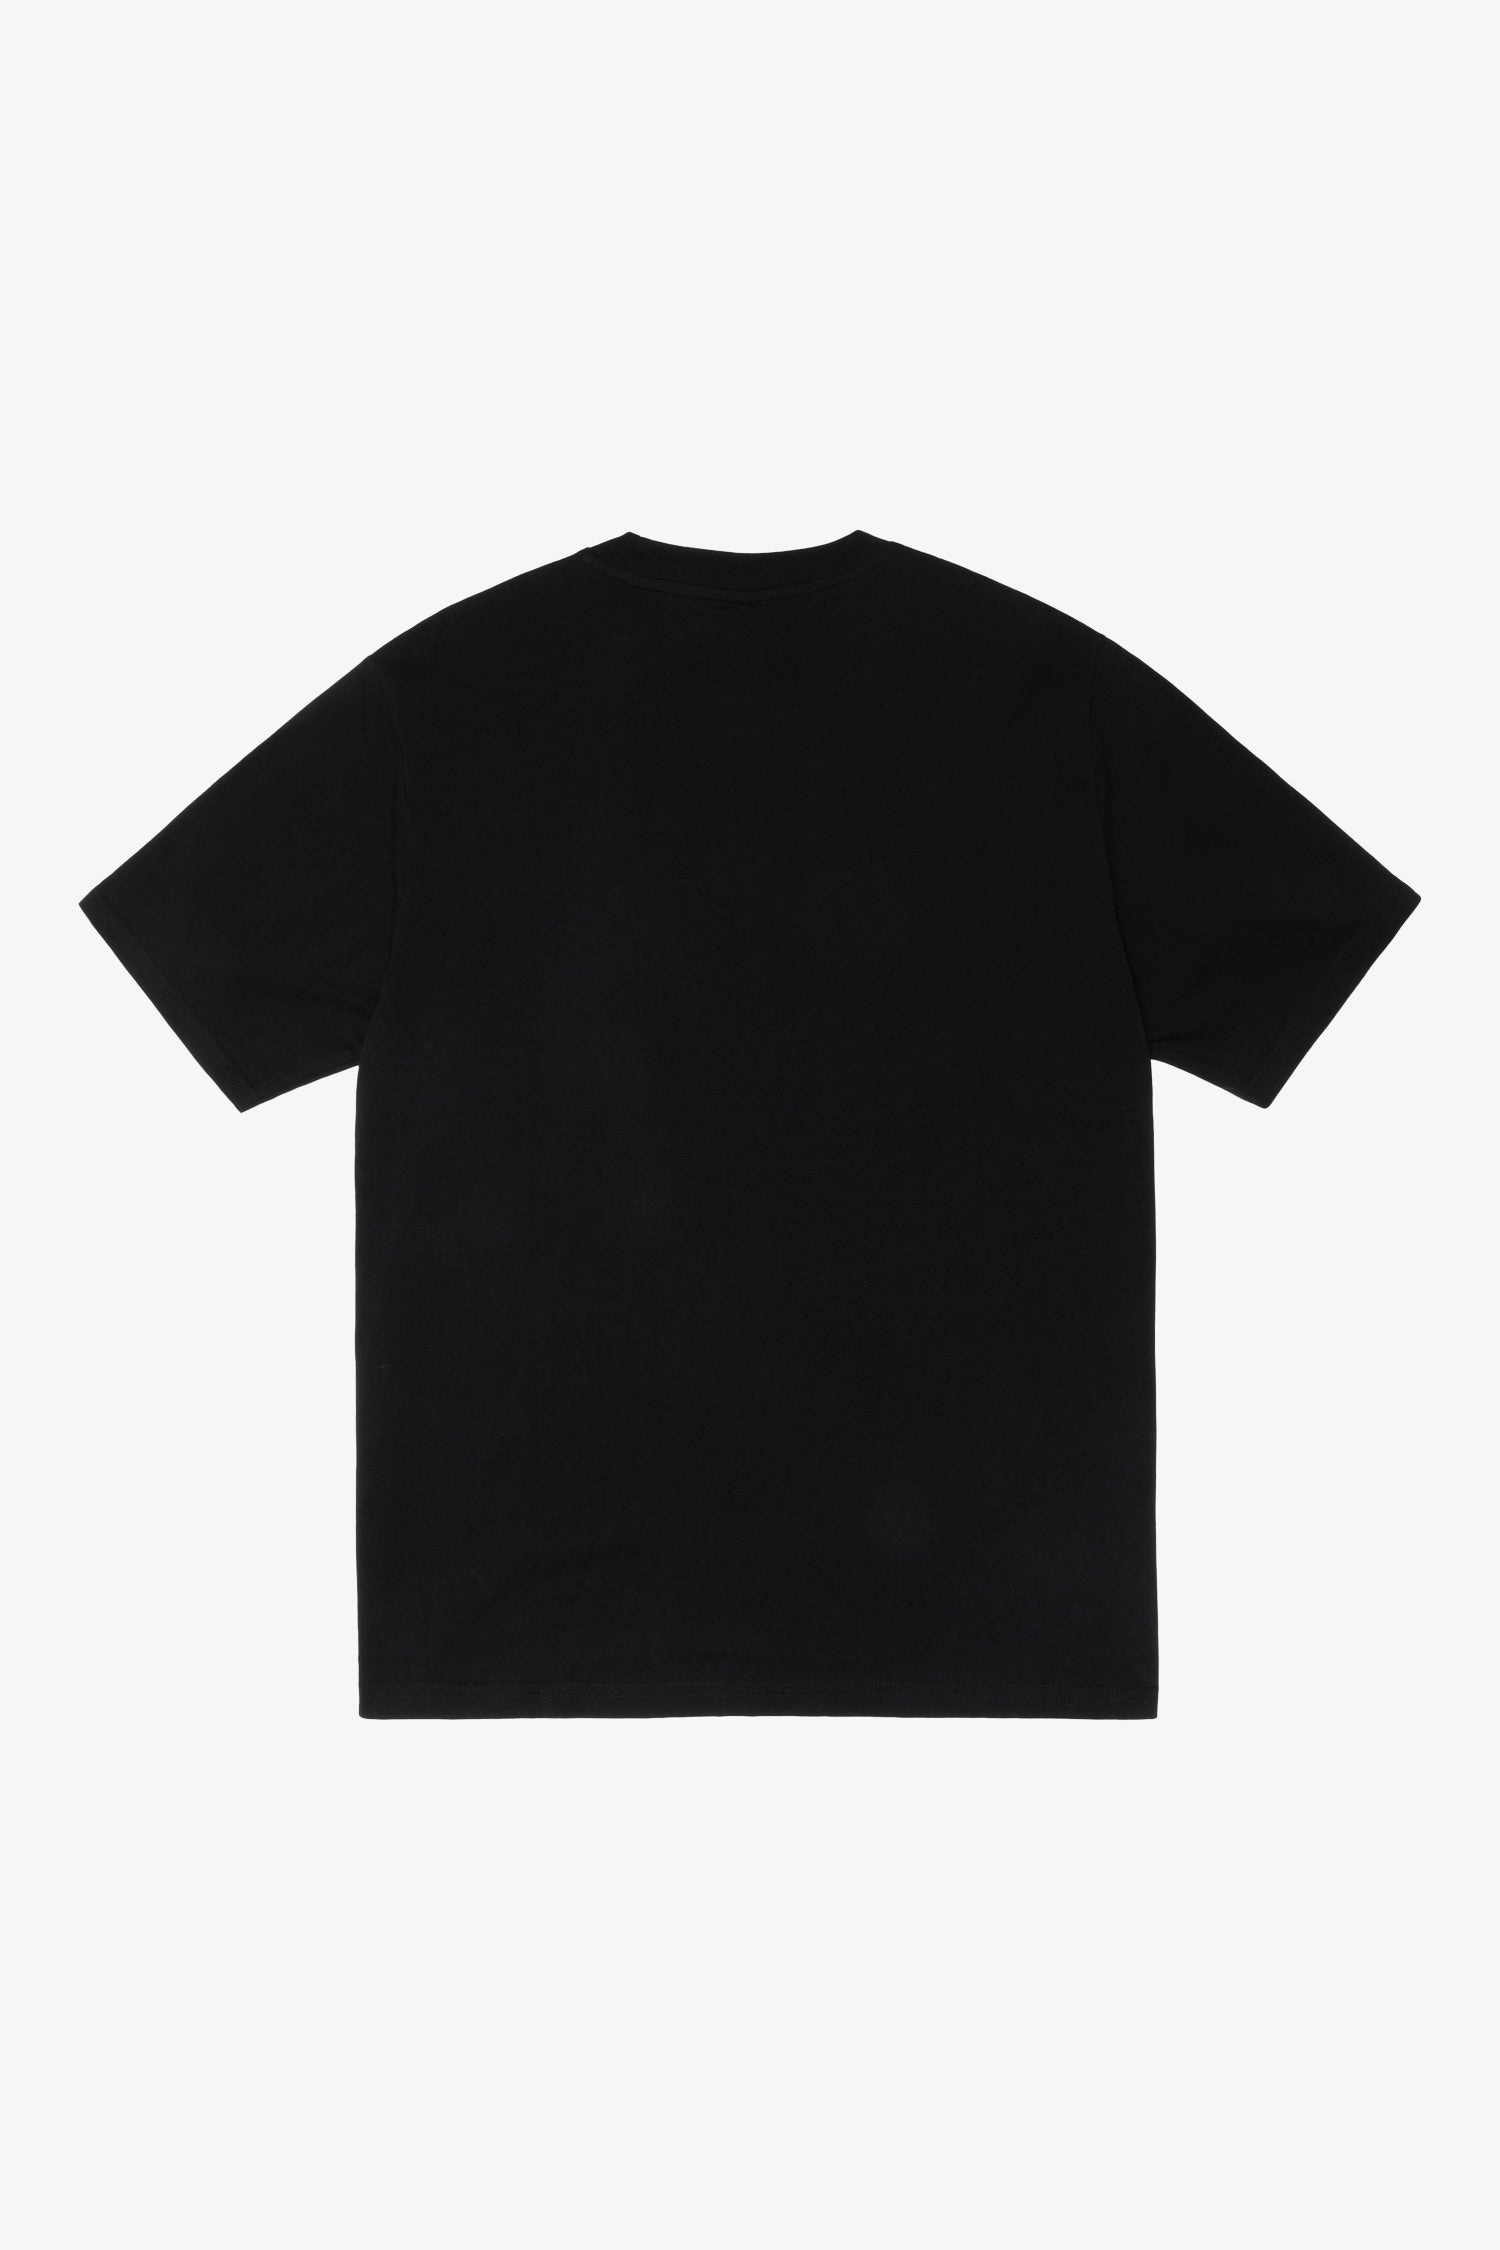 House Party Garment Dyed Tee- Selectshop FRAME